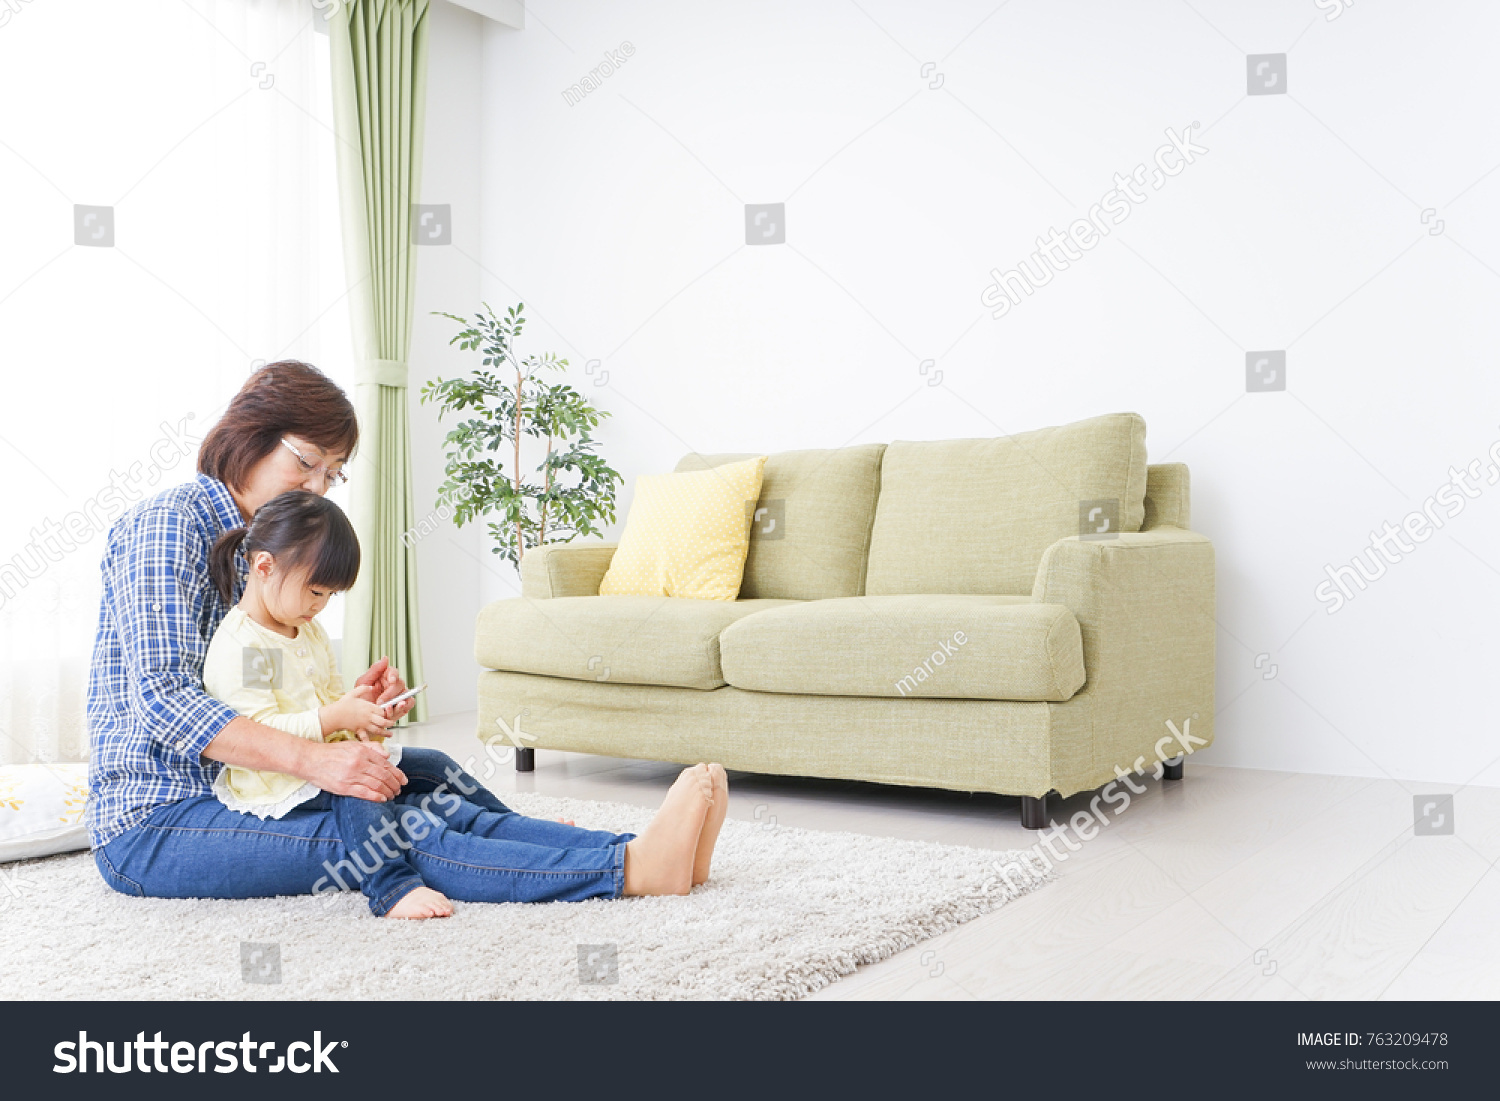 Child using smartphone with grandmother #763209478